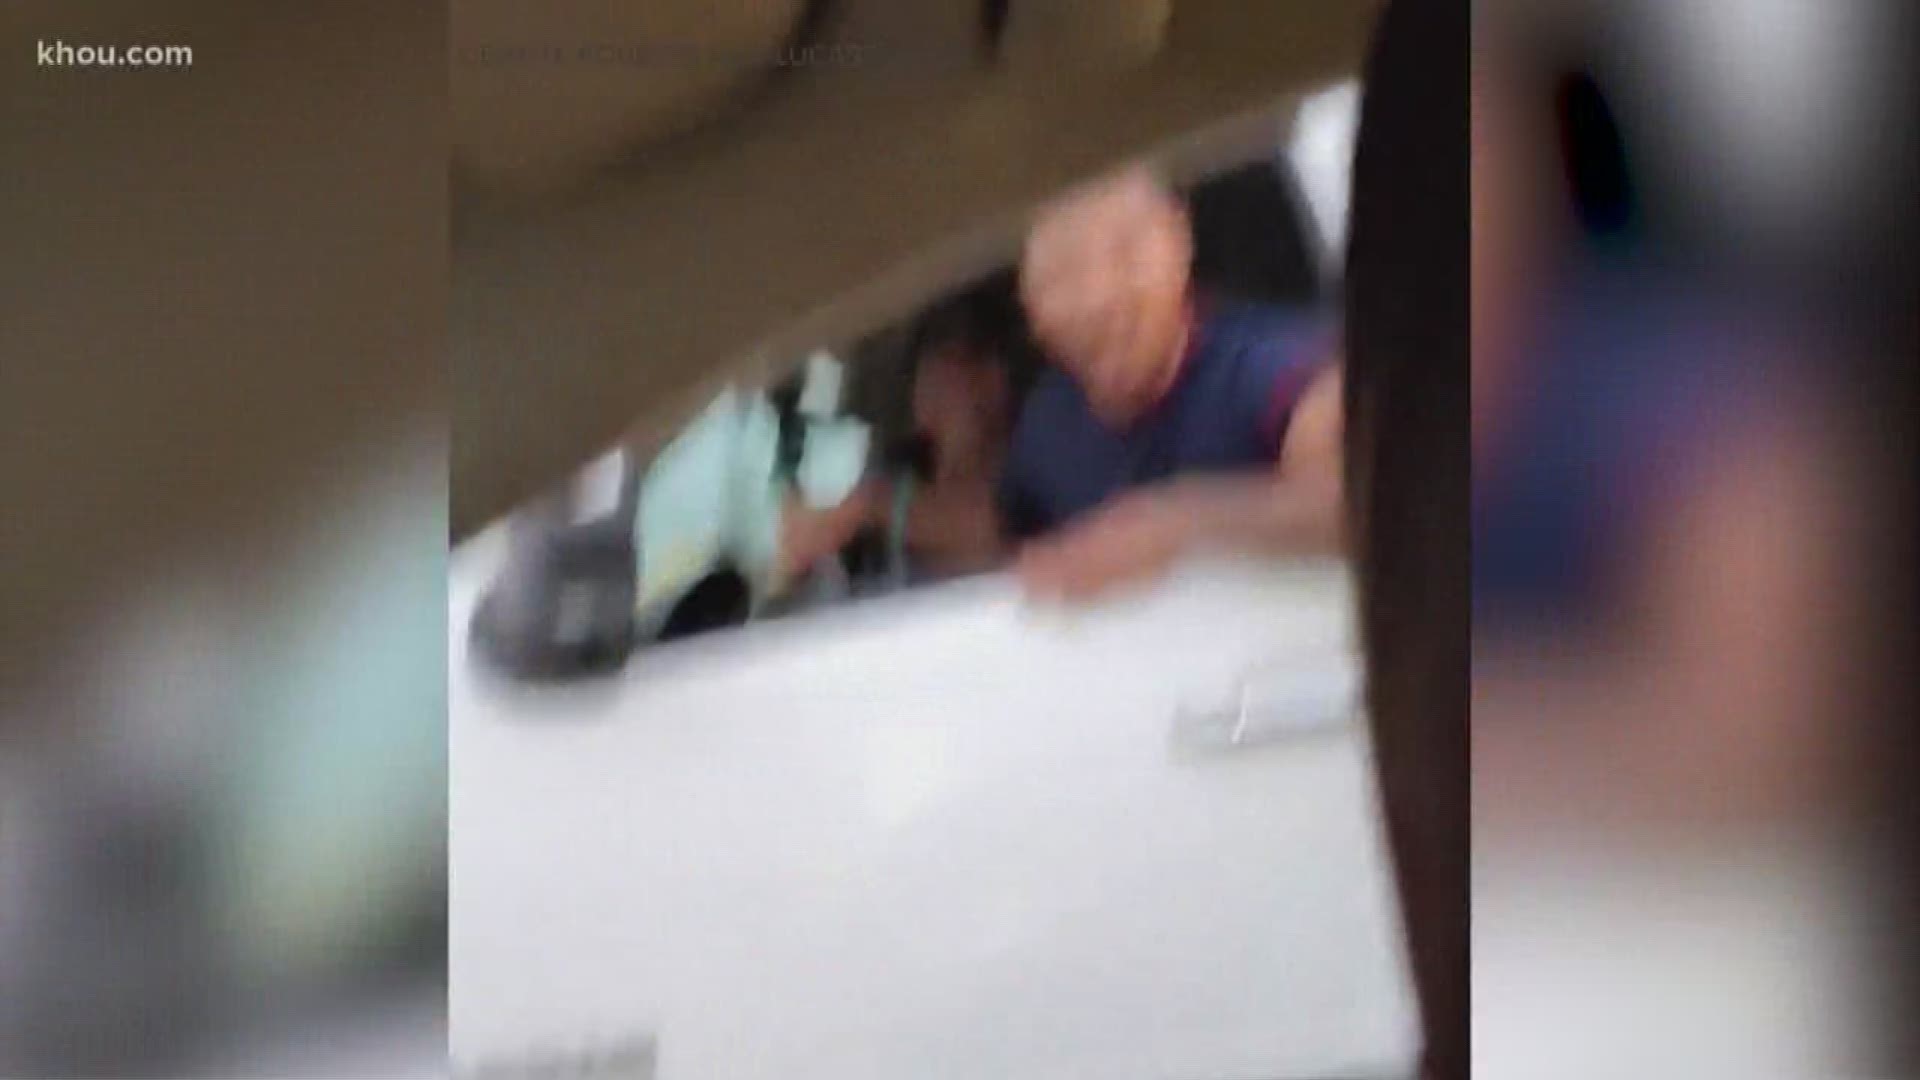 Armando Montes is facing multiple charges in connection with this incident captured on camera on a highway northeast of Houston.